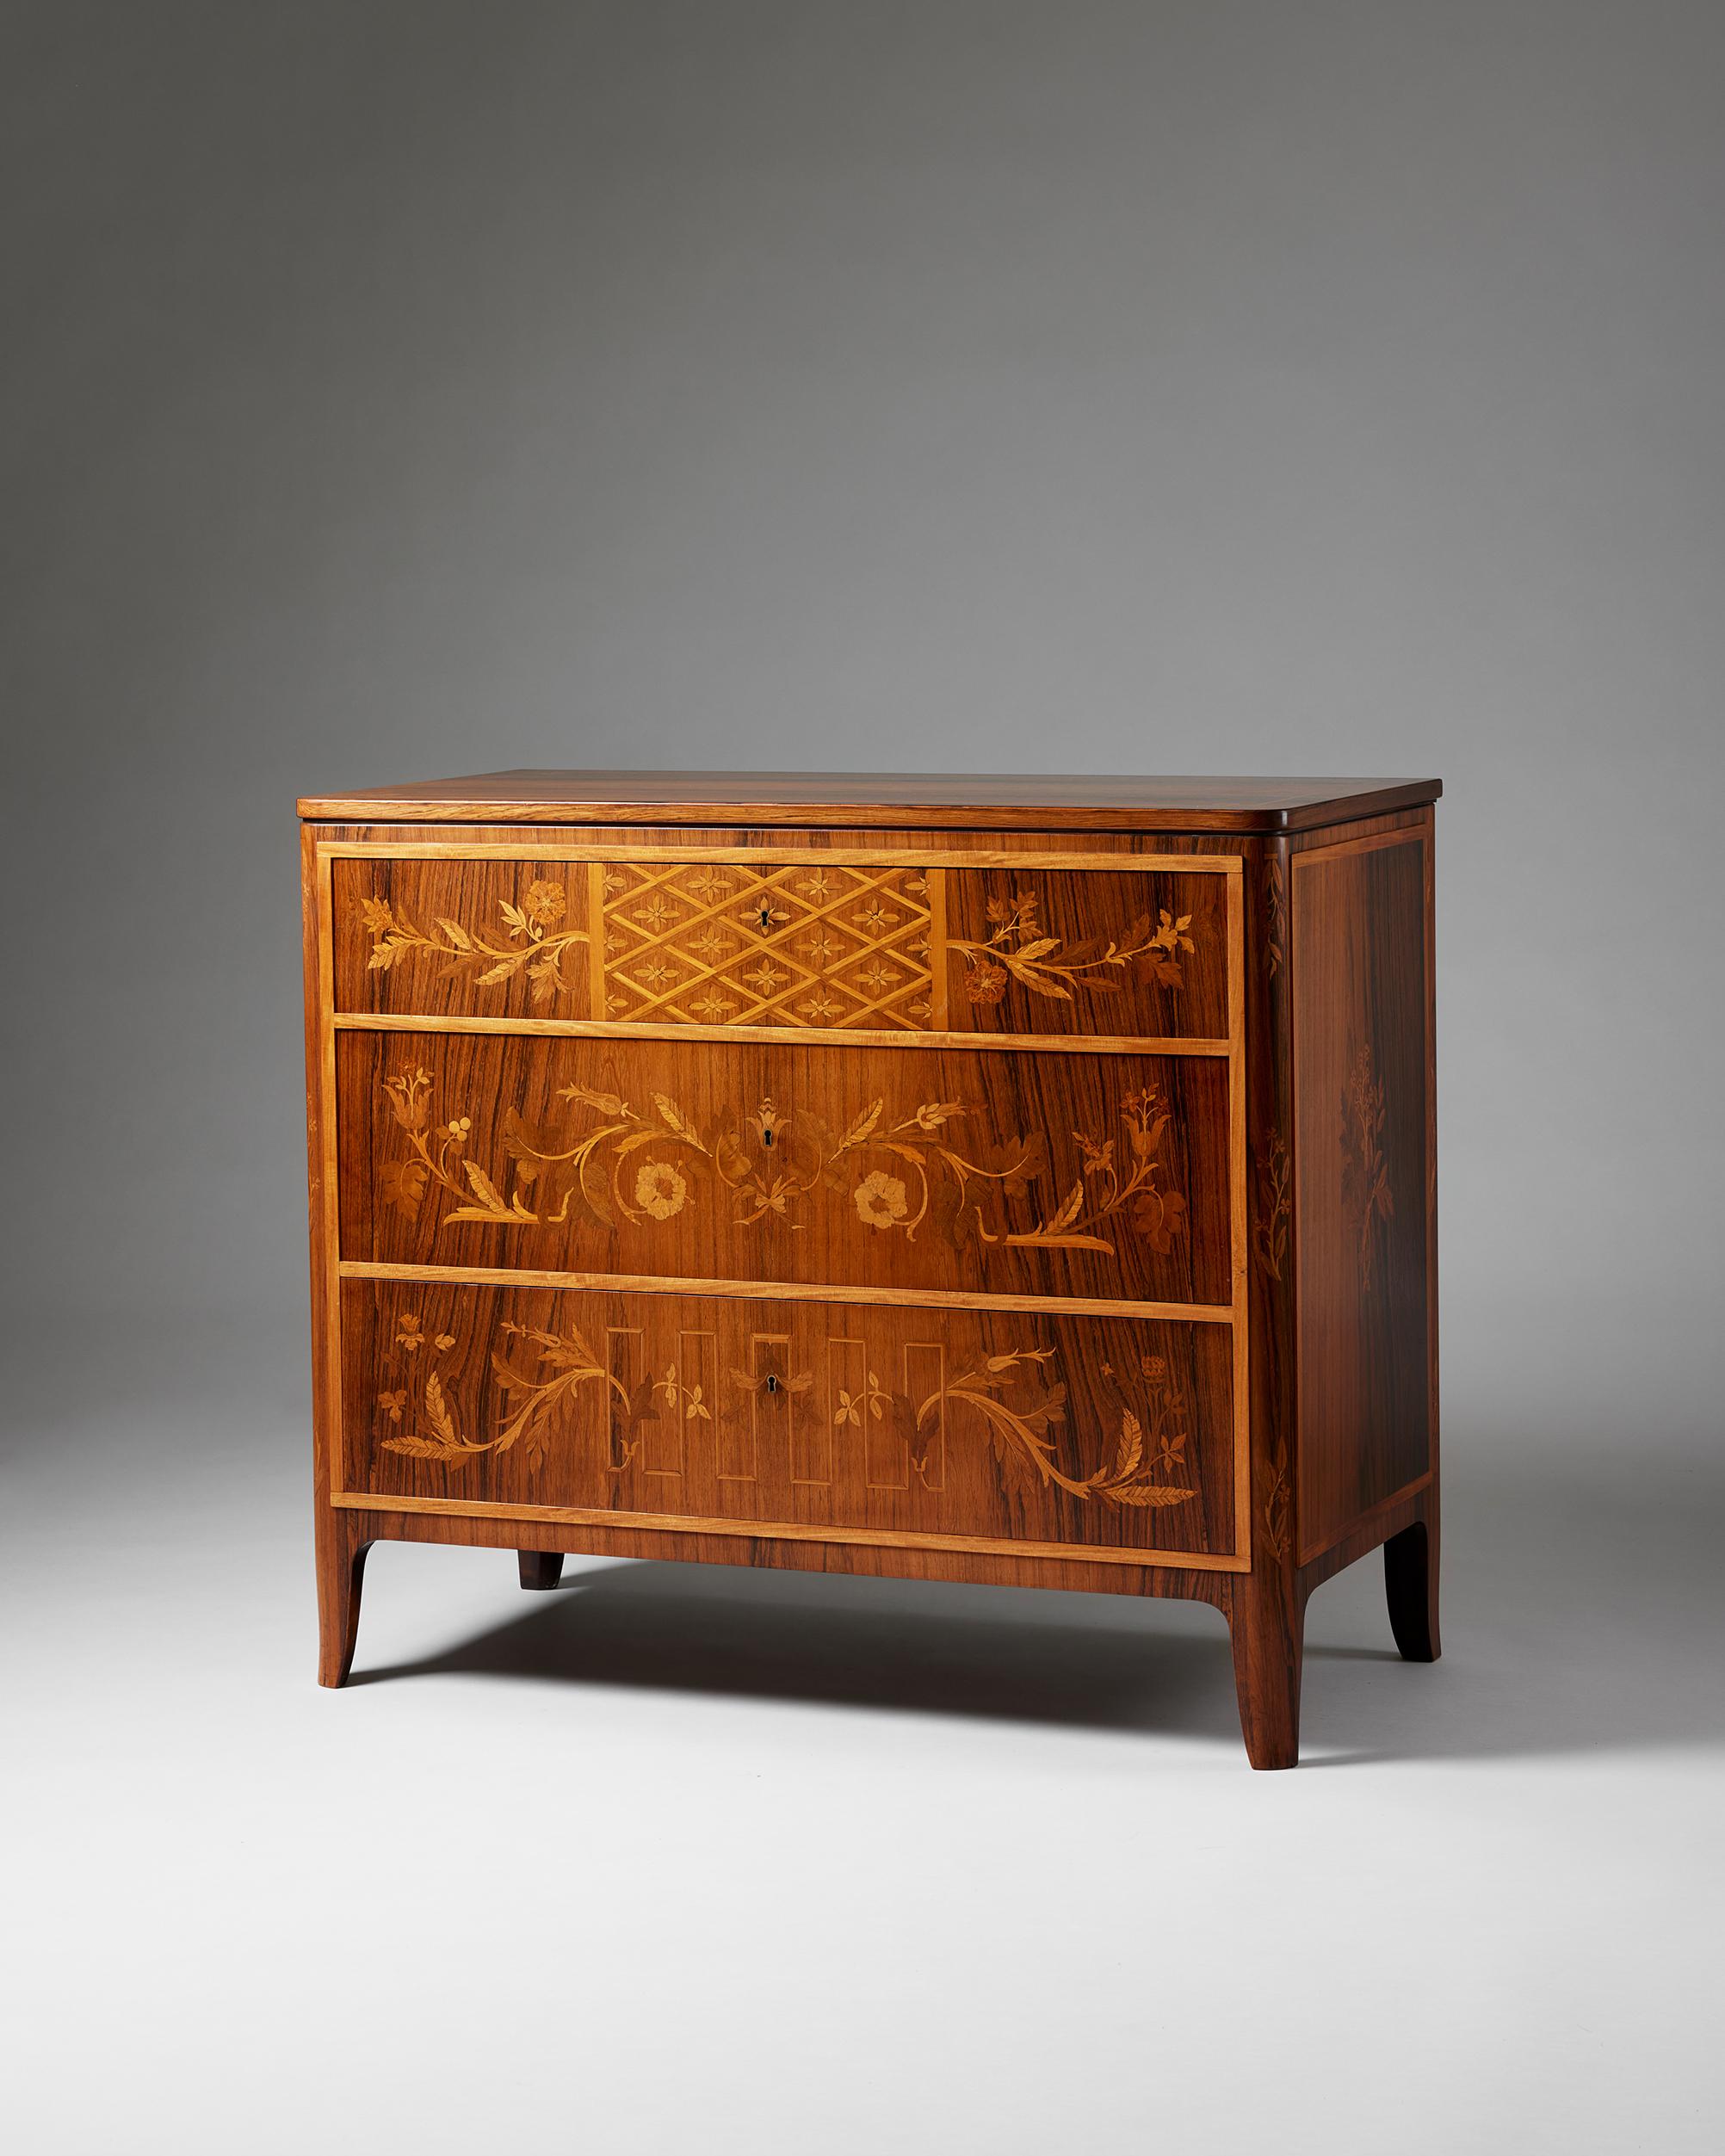 Chest of drawers designed by Carl Malmsten,
Sweden, 1930s.

Veneered mahogany, jacaranda, birch, and fruit trees.

Stamped.

Made by master carpenter Albin Johansson.

H: 87 cm
W: 100.5 cm 
D: 51.5 cm